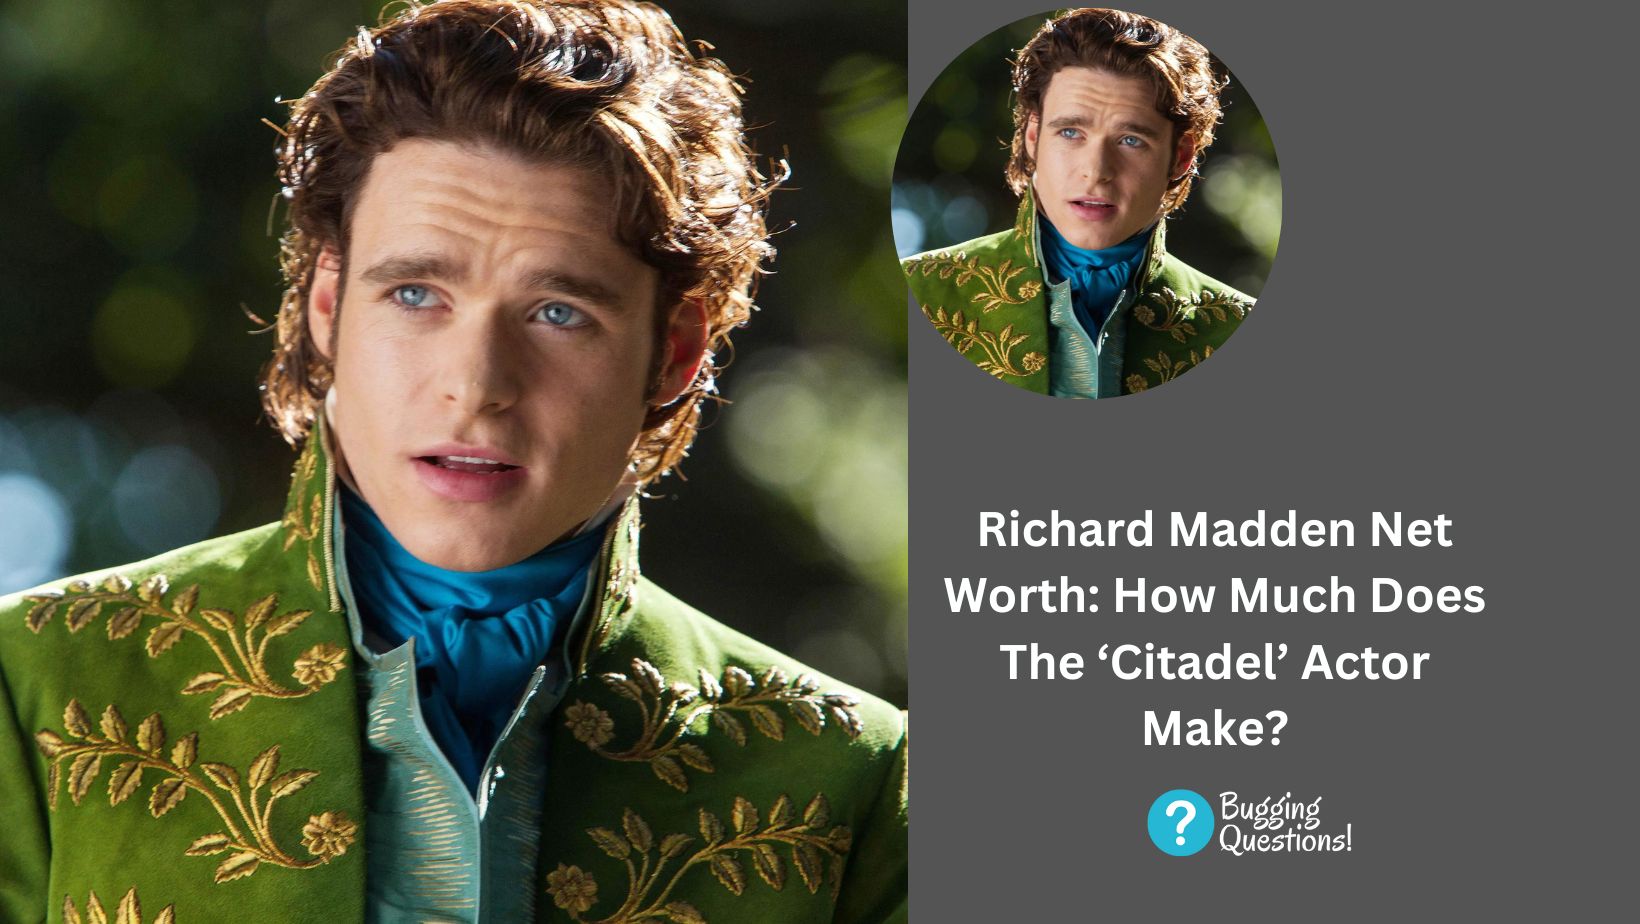 Richard Madden Net Worth: How Much Does The ‘Citadel’ Actor Make?